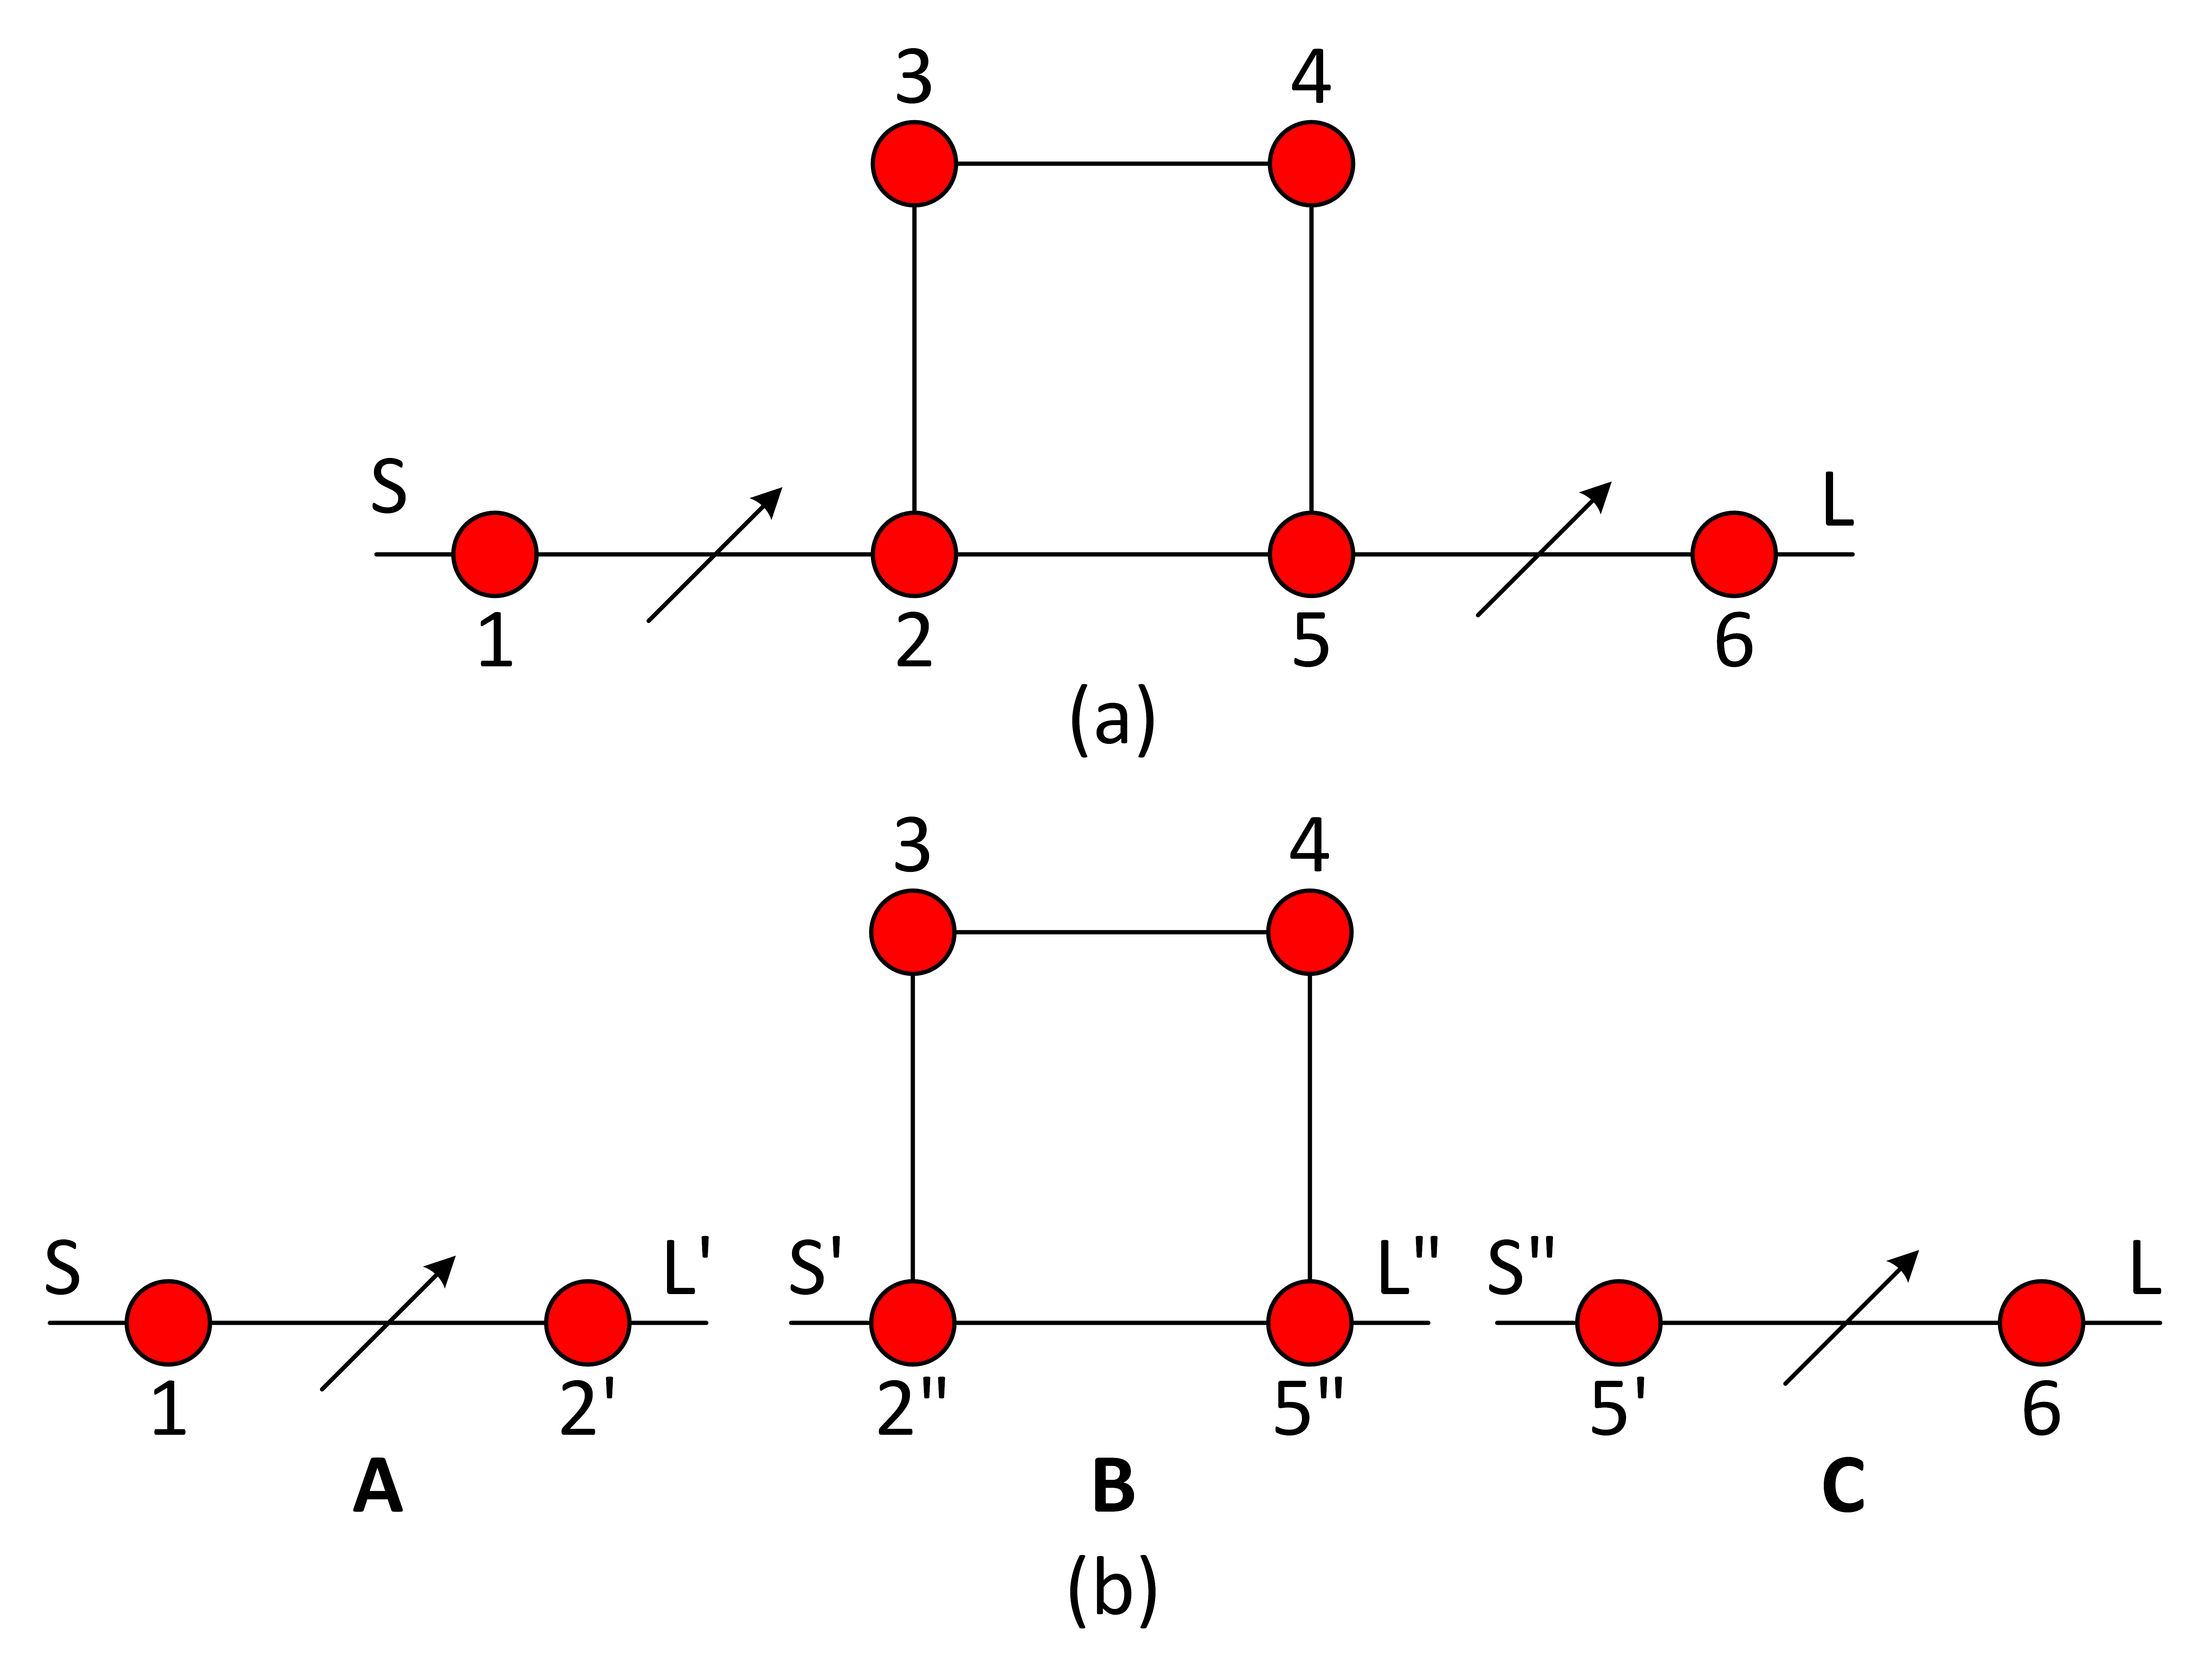 a: Topology combining a quadruplet and two sections with dispersive couplings - b: circuital blocs associated to the functional decomposition